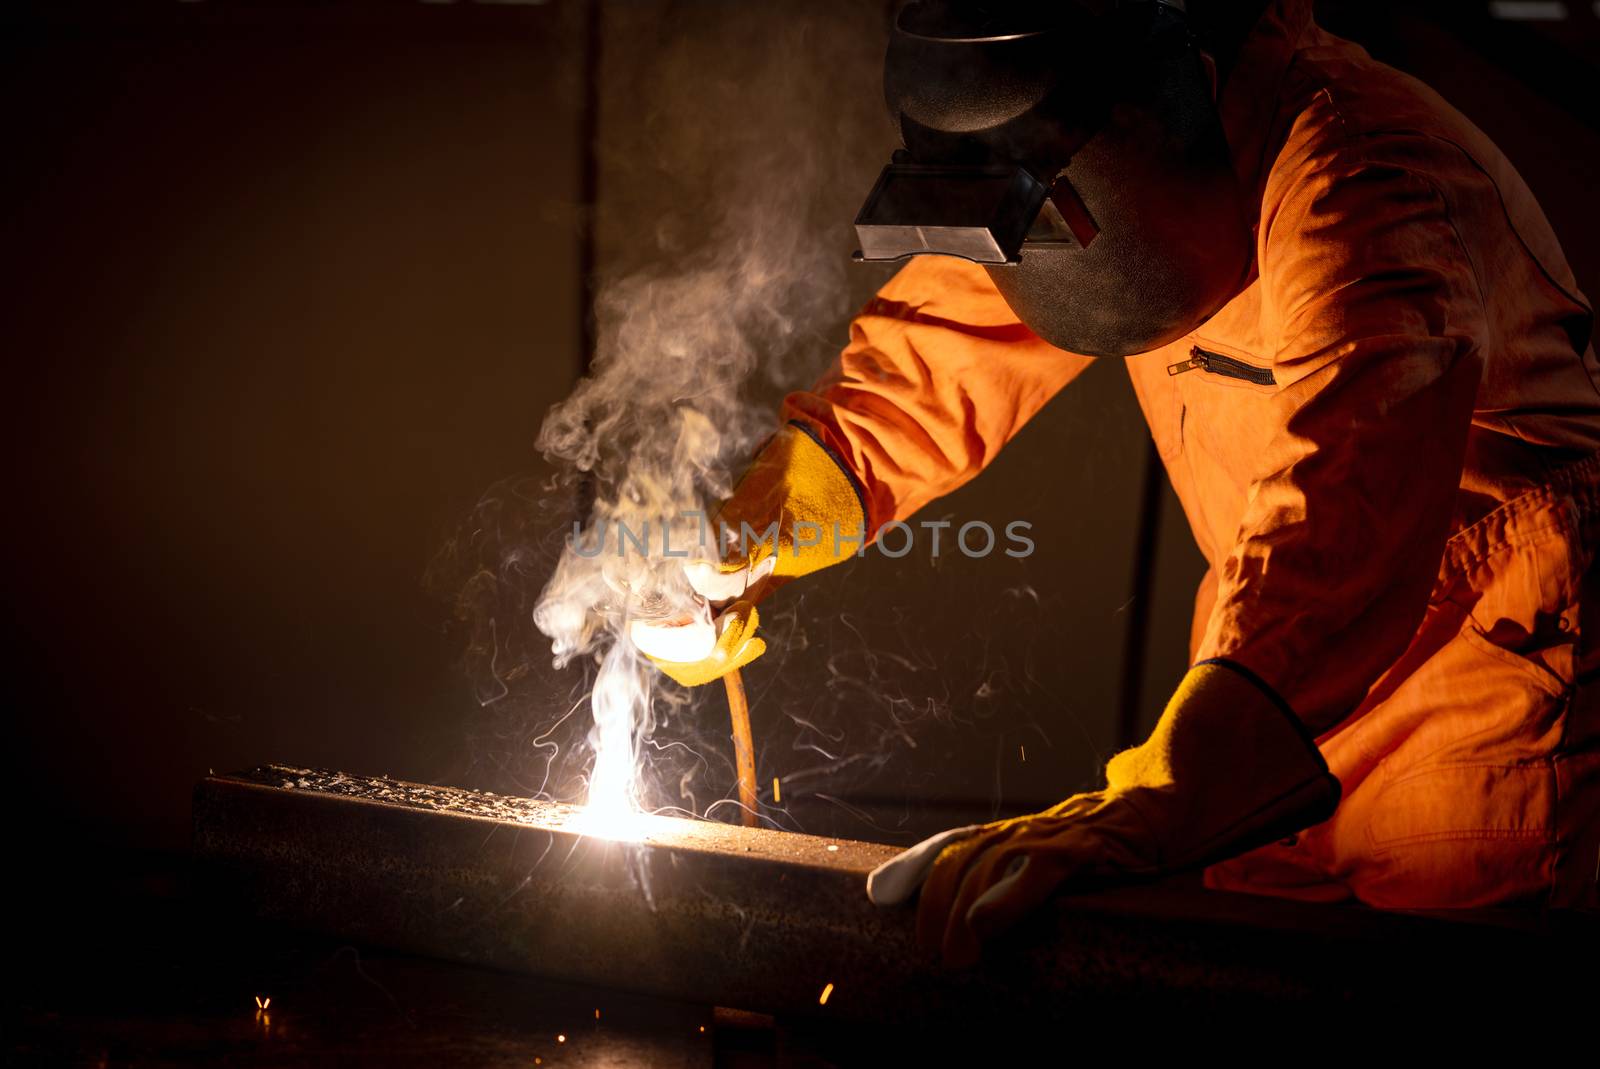 Metal industry workers are welding steel sheets for real estate projects received. Sparkler on dark background, close-up. Heavy work in factory.